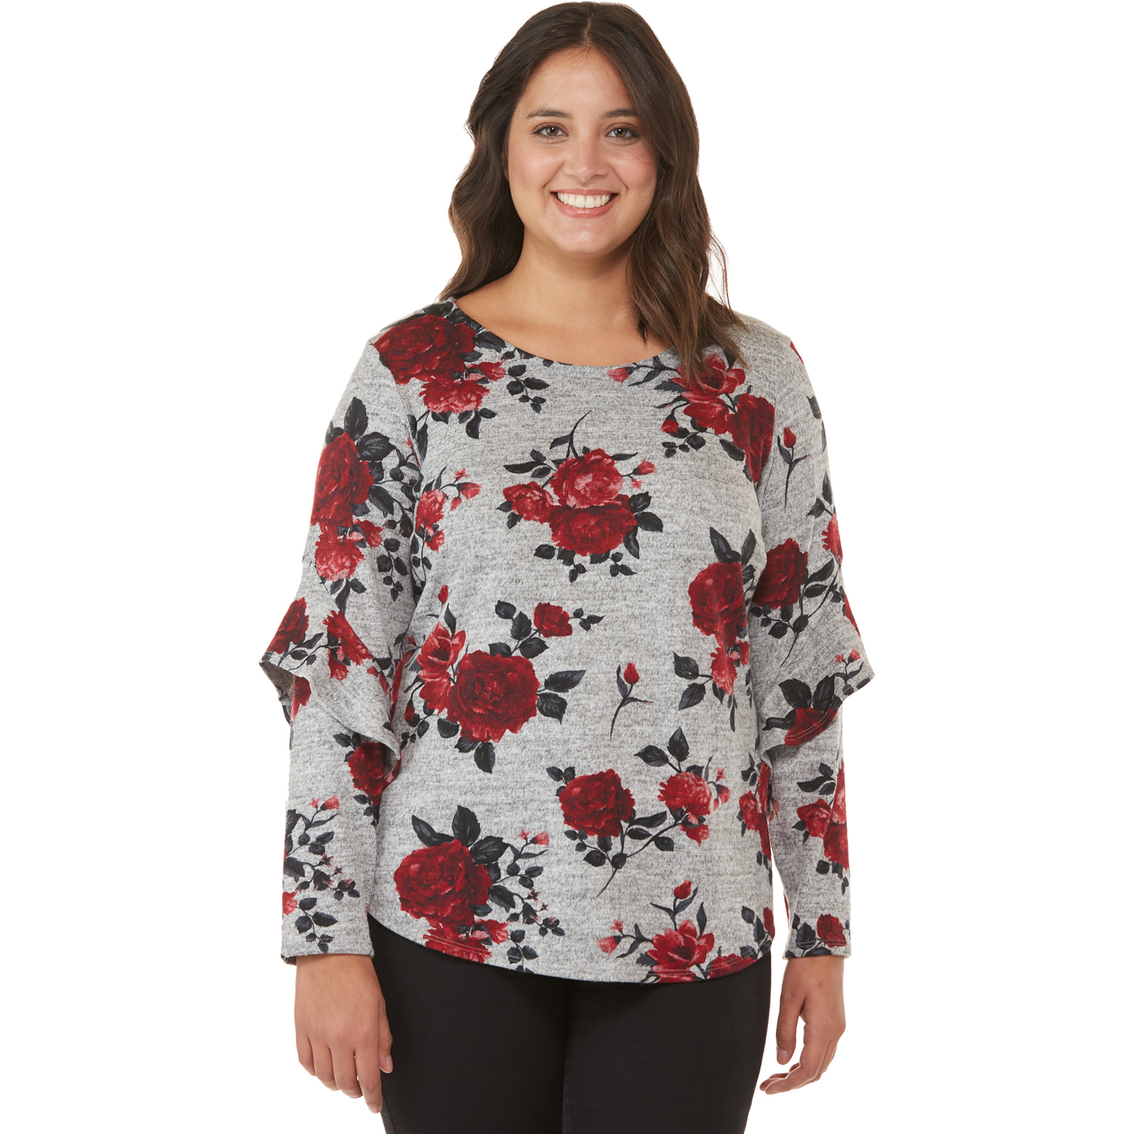 Agb Plus Size Print Fuzzy Top | Tops | Clothing & Accessories | Shop ...